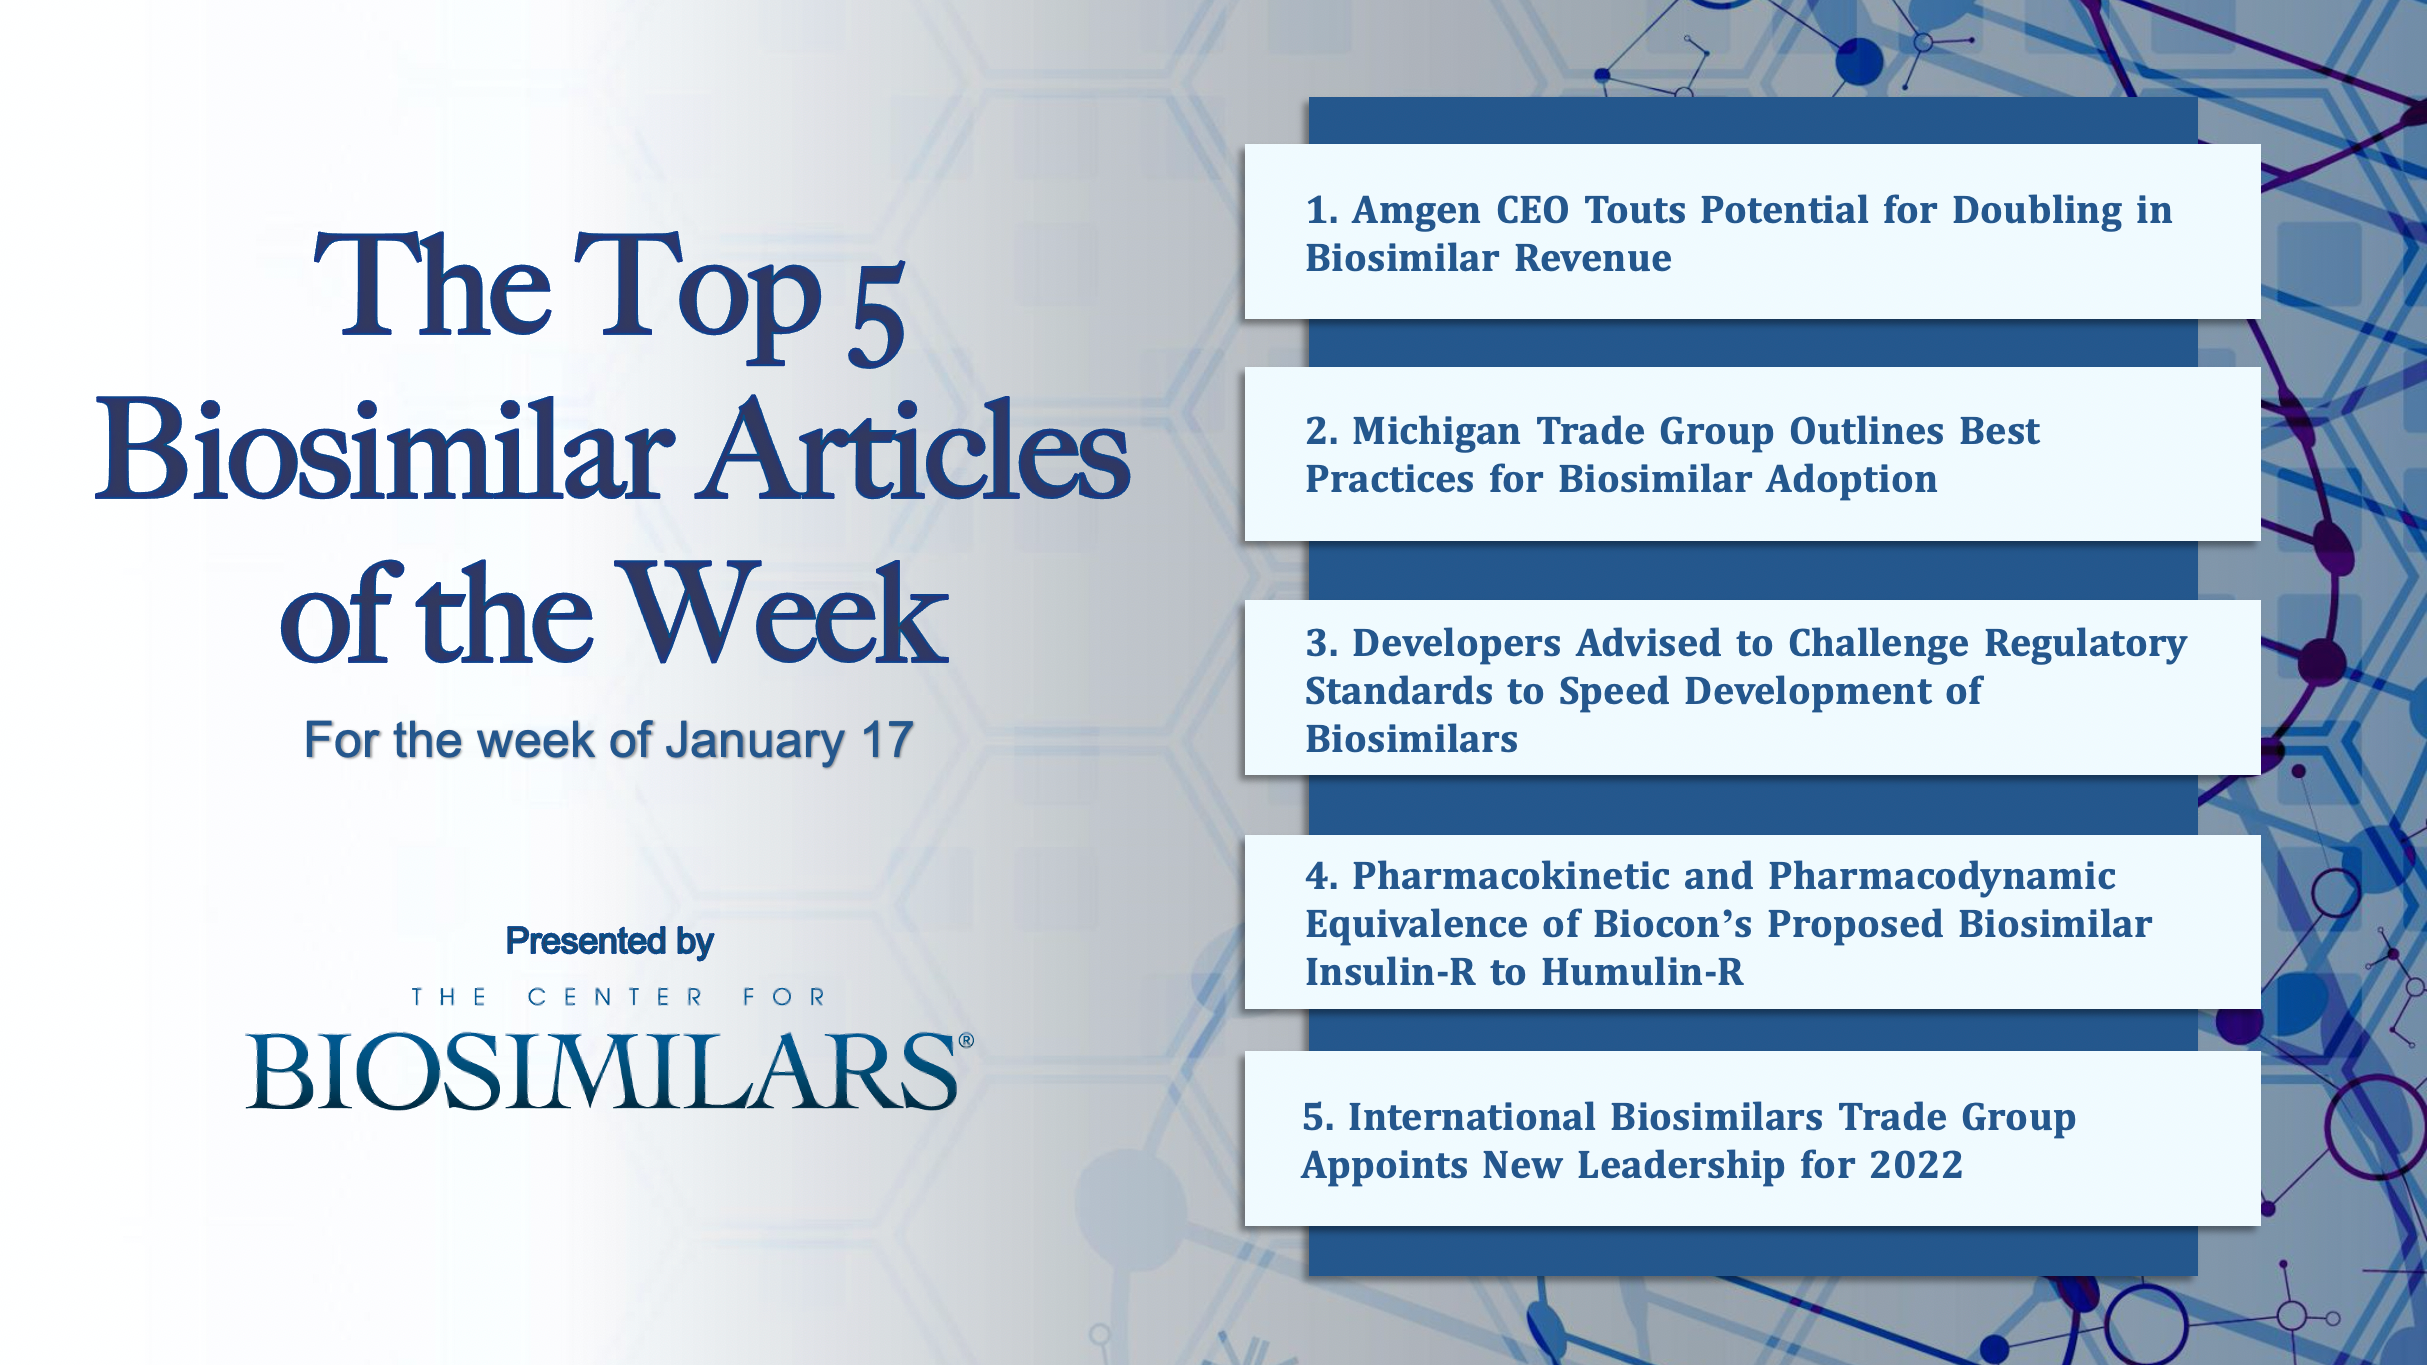 Here are the top 5 biosimilar articles for the week of January 17, 2022.